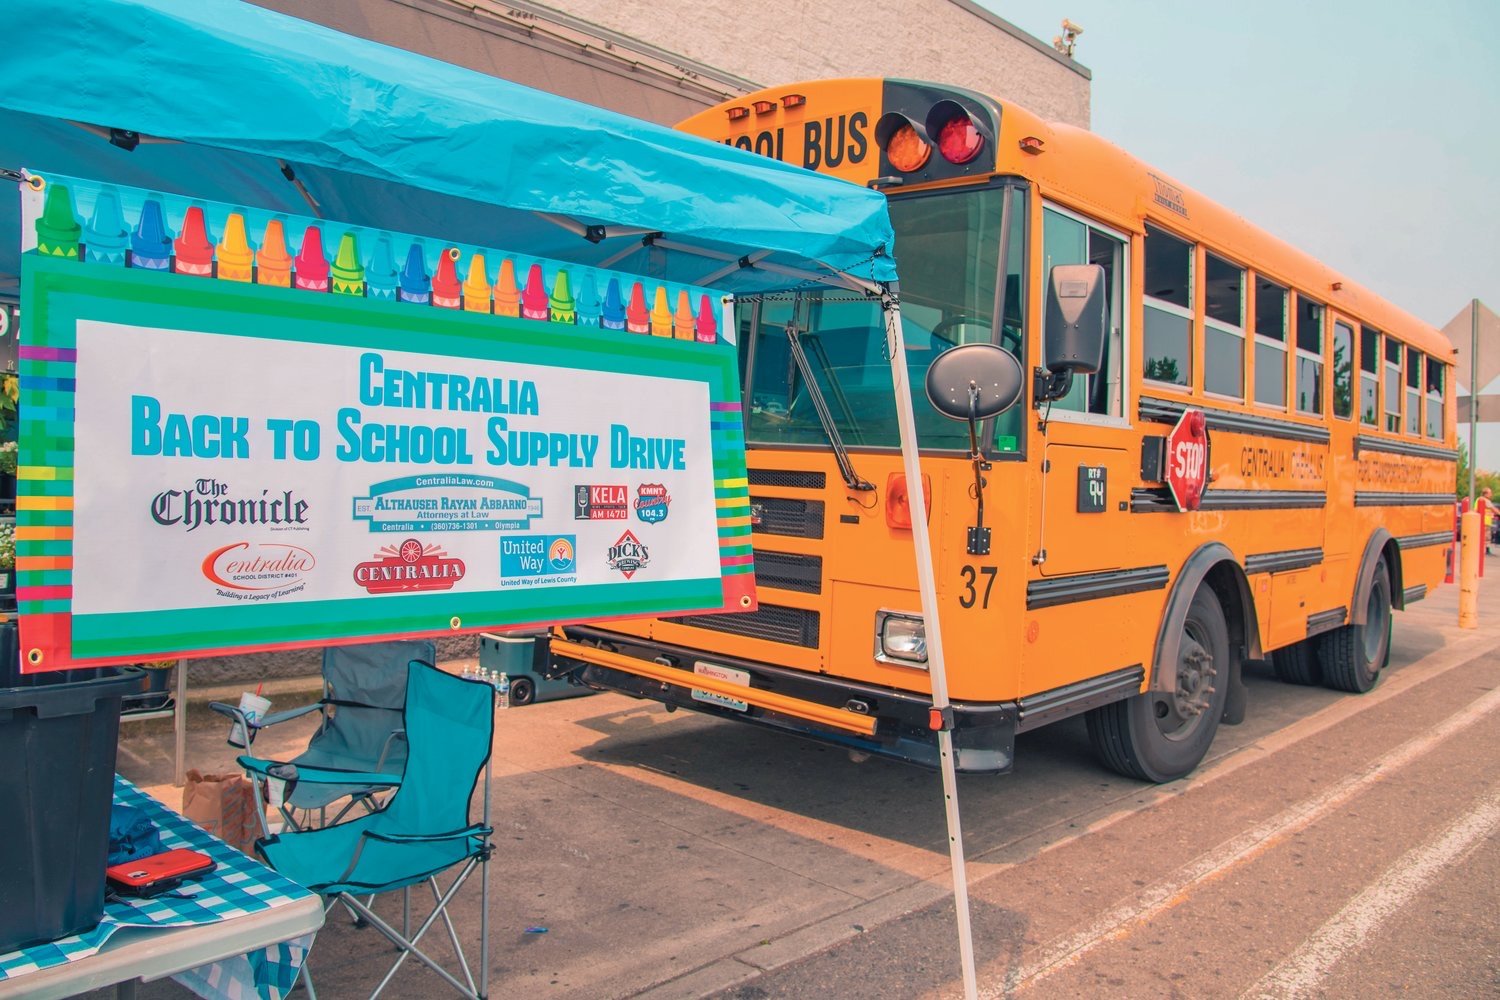 Althauser Rayan Abbarno helped organize the Centralia Back to School Supply Drive and partnered with a variety of businesses and organizations like the United Way of Lewis County to collect and distribute back- to-school supplies.